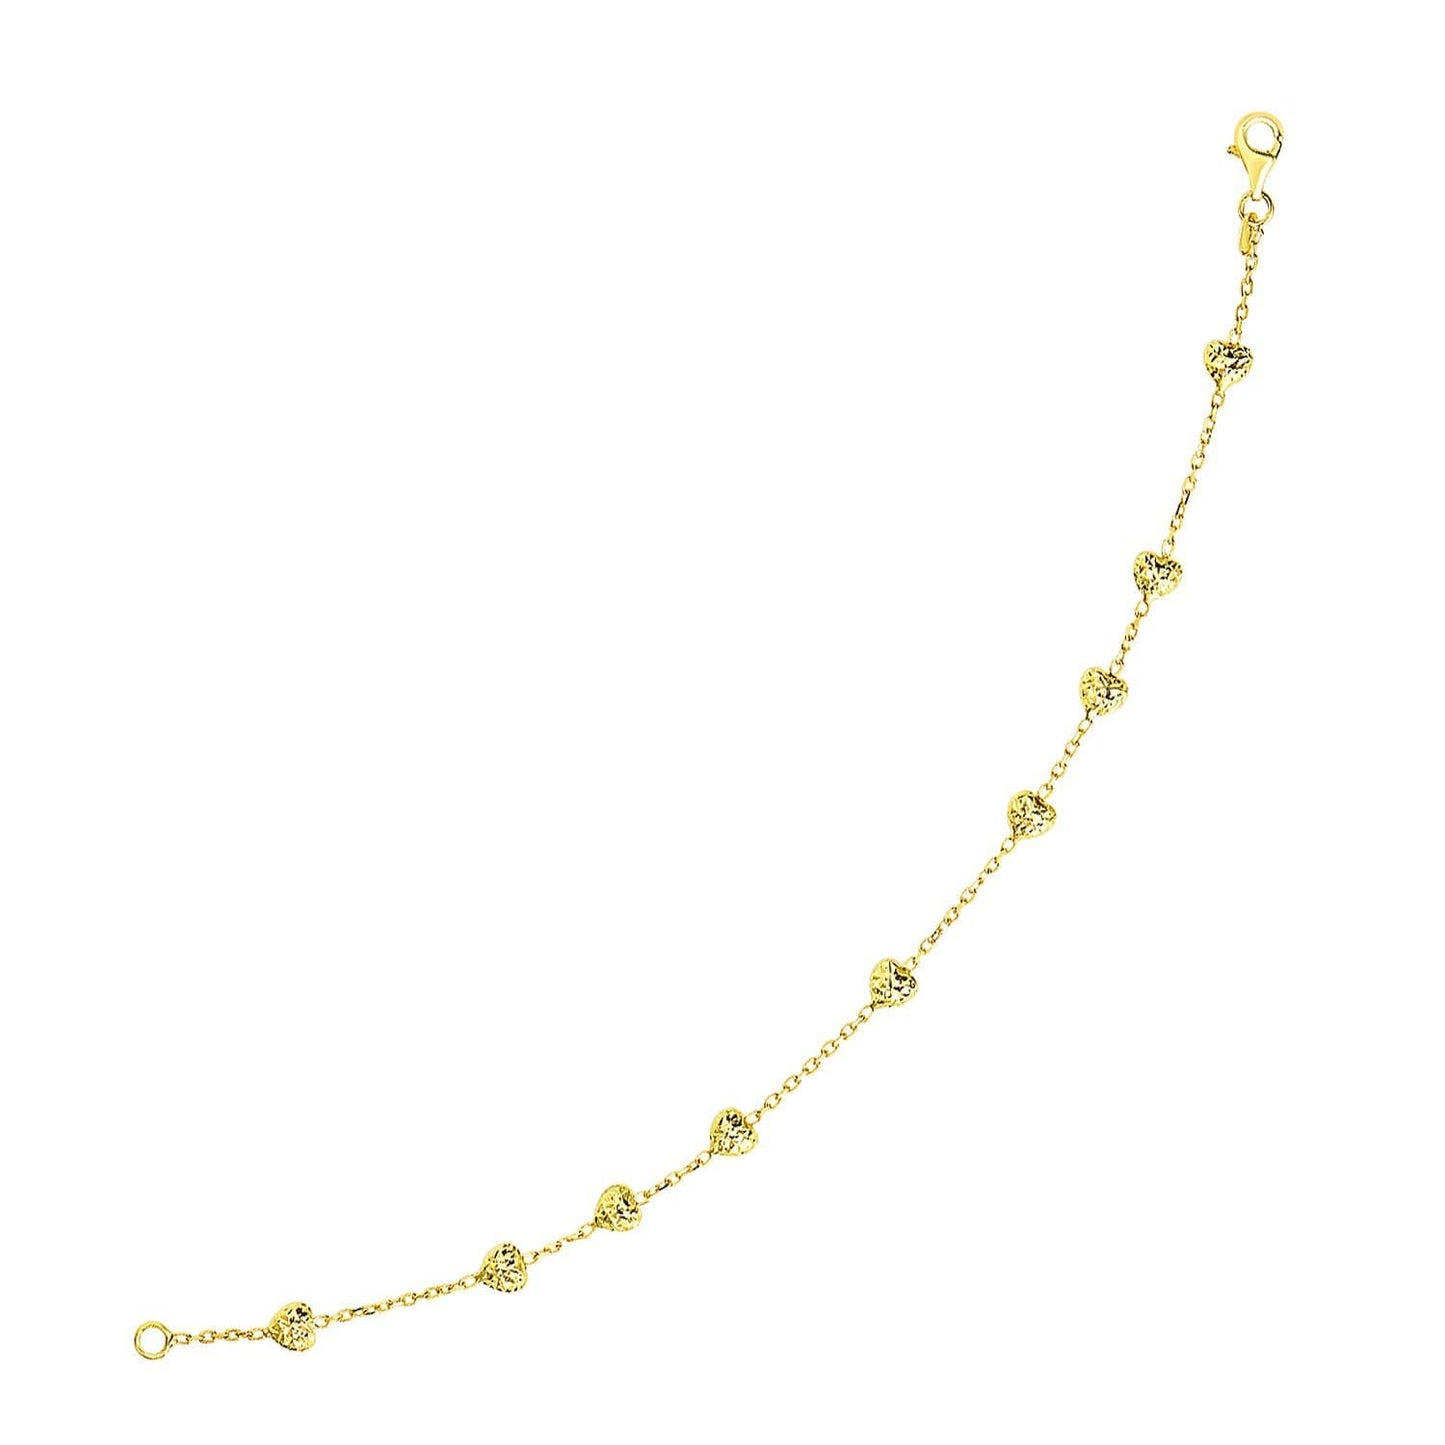 14k Yellow Gold Chain Bracelet with Puffed Diamond Cut Heart Stations